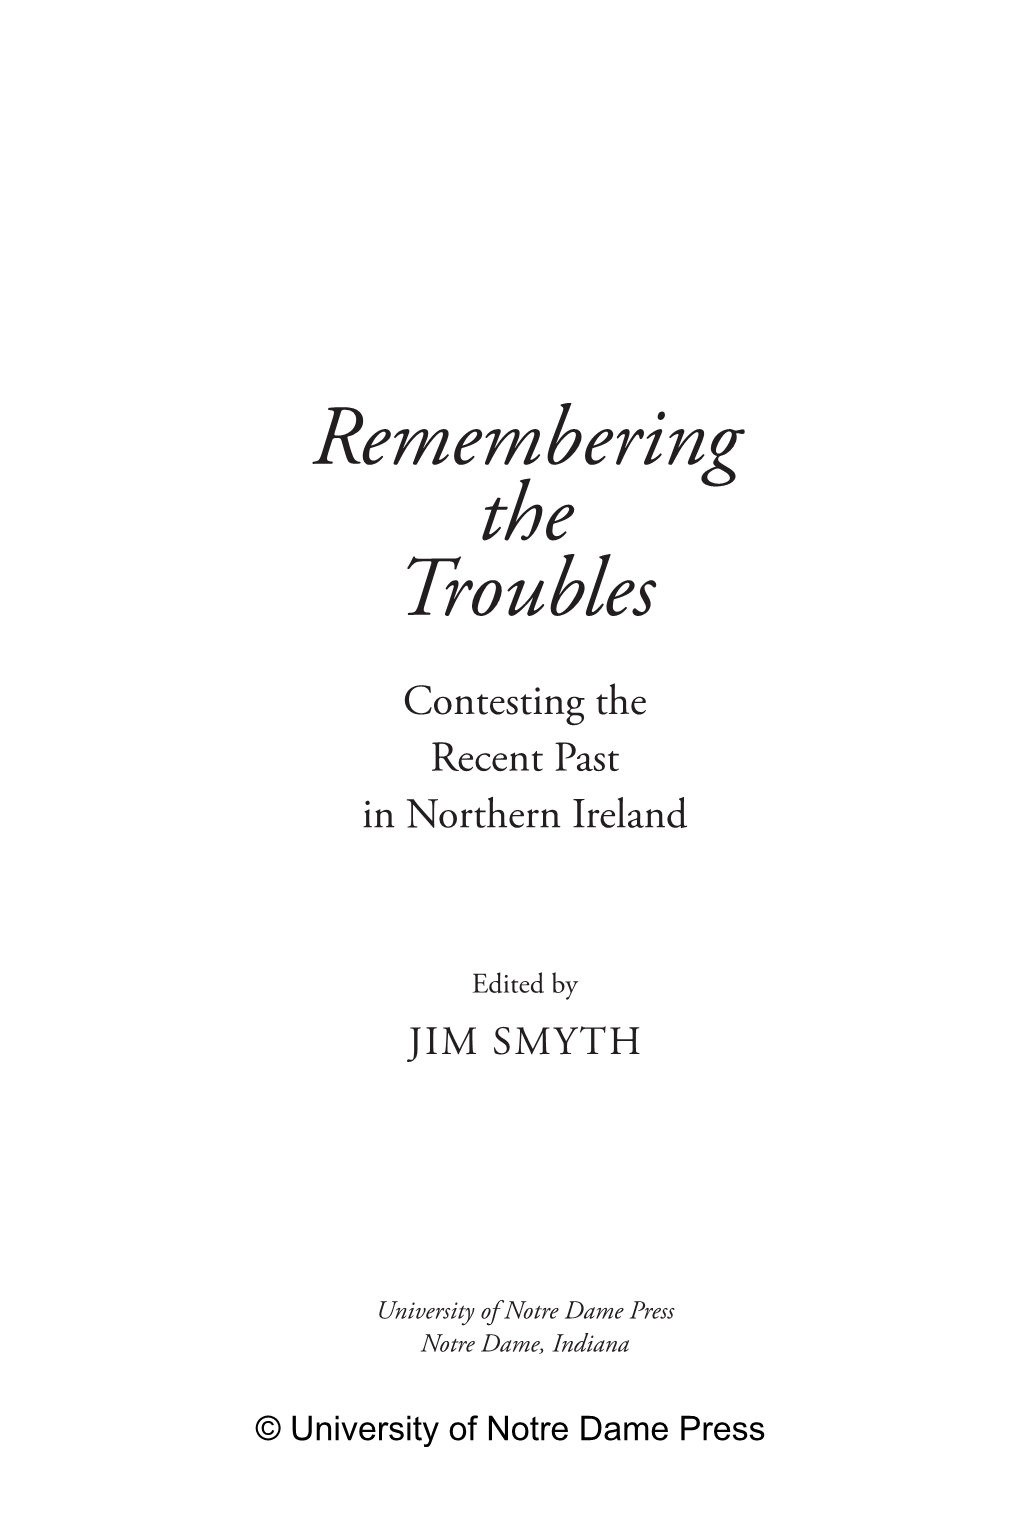 Remembering the Troubles Contesting the Recent Past in Northern Ireland